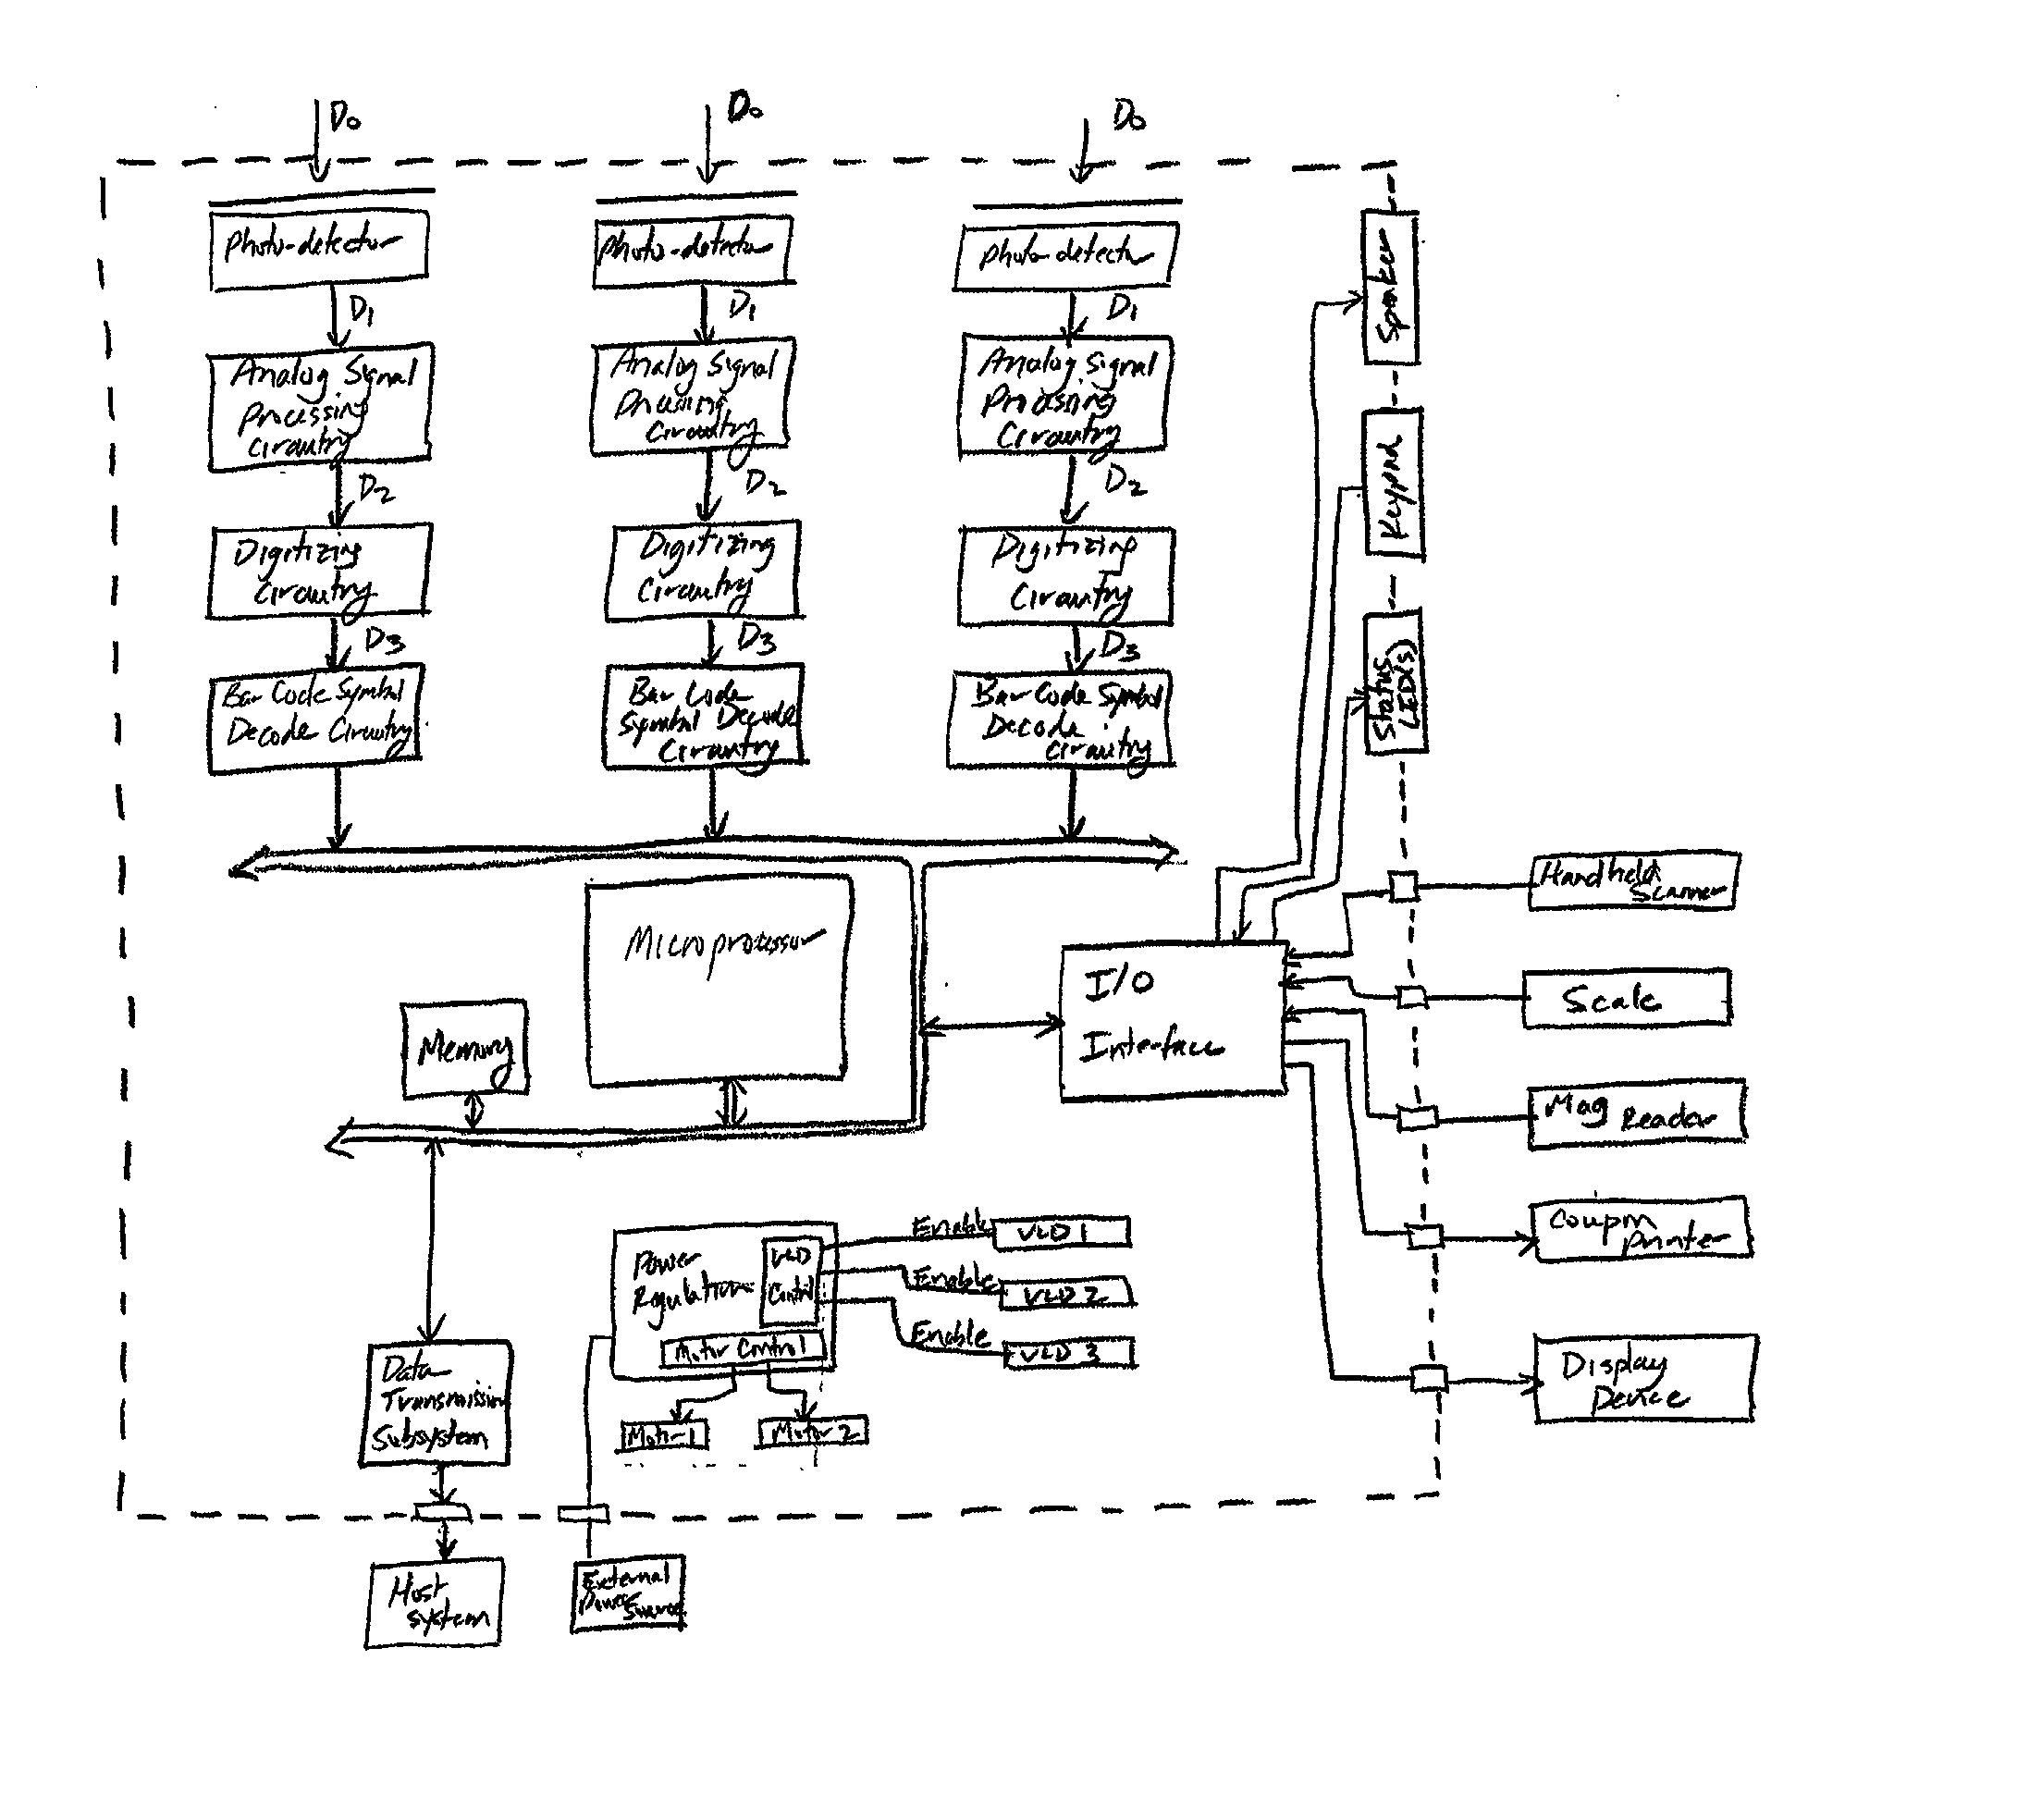 Multipath scan data signal processor having multiple signal processing paths with different operational characteristics to enable processing of signals having increased dynamic range